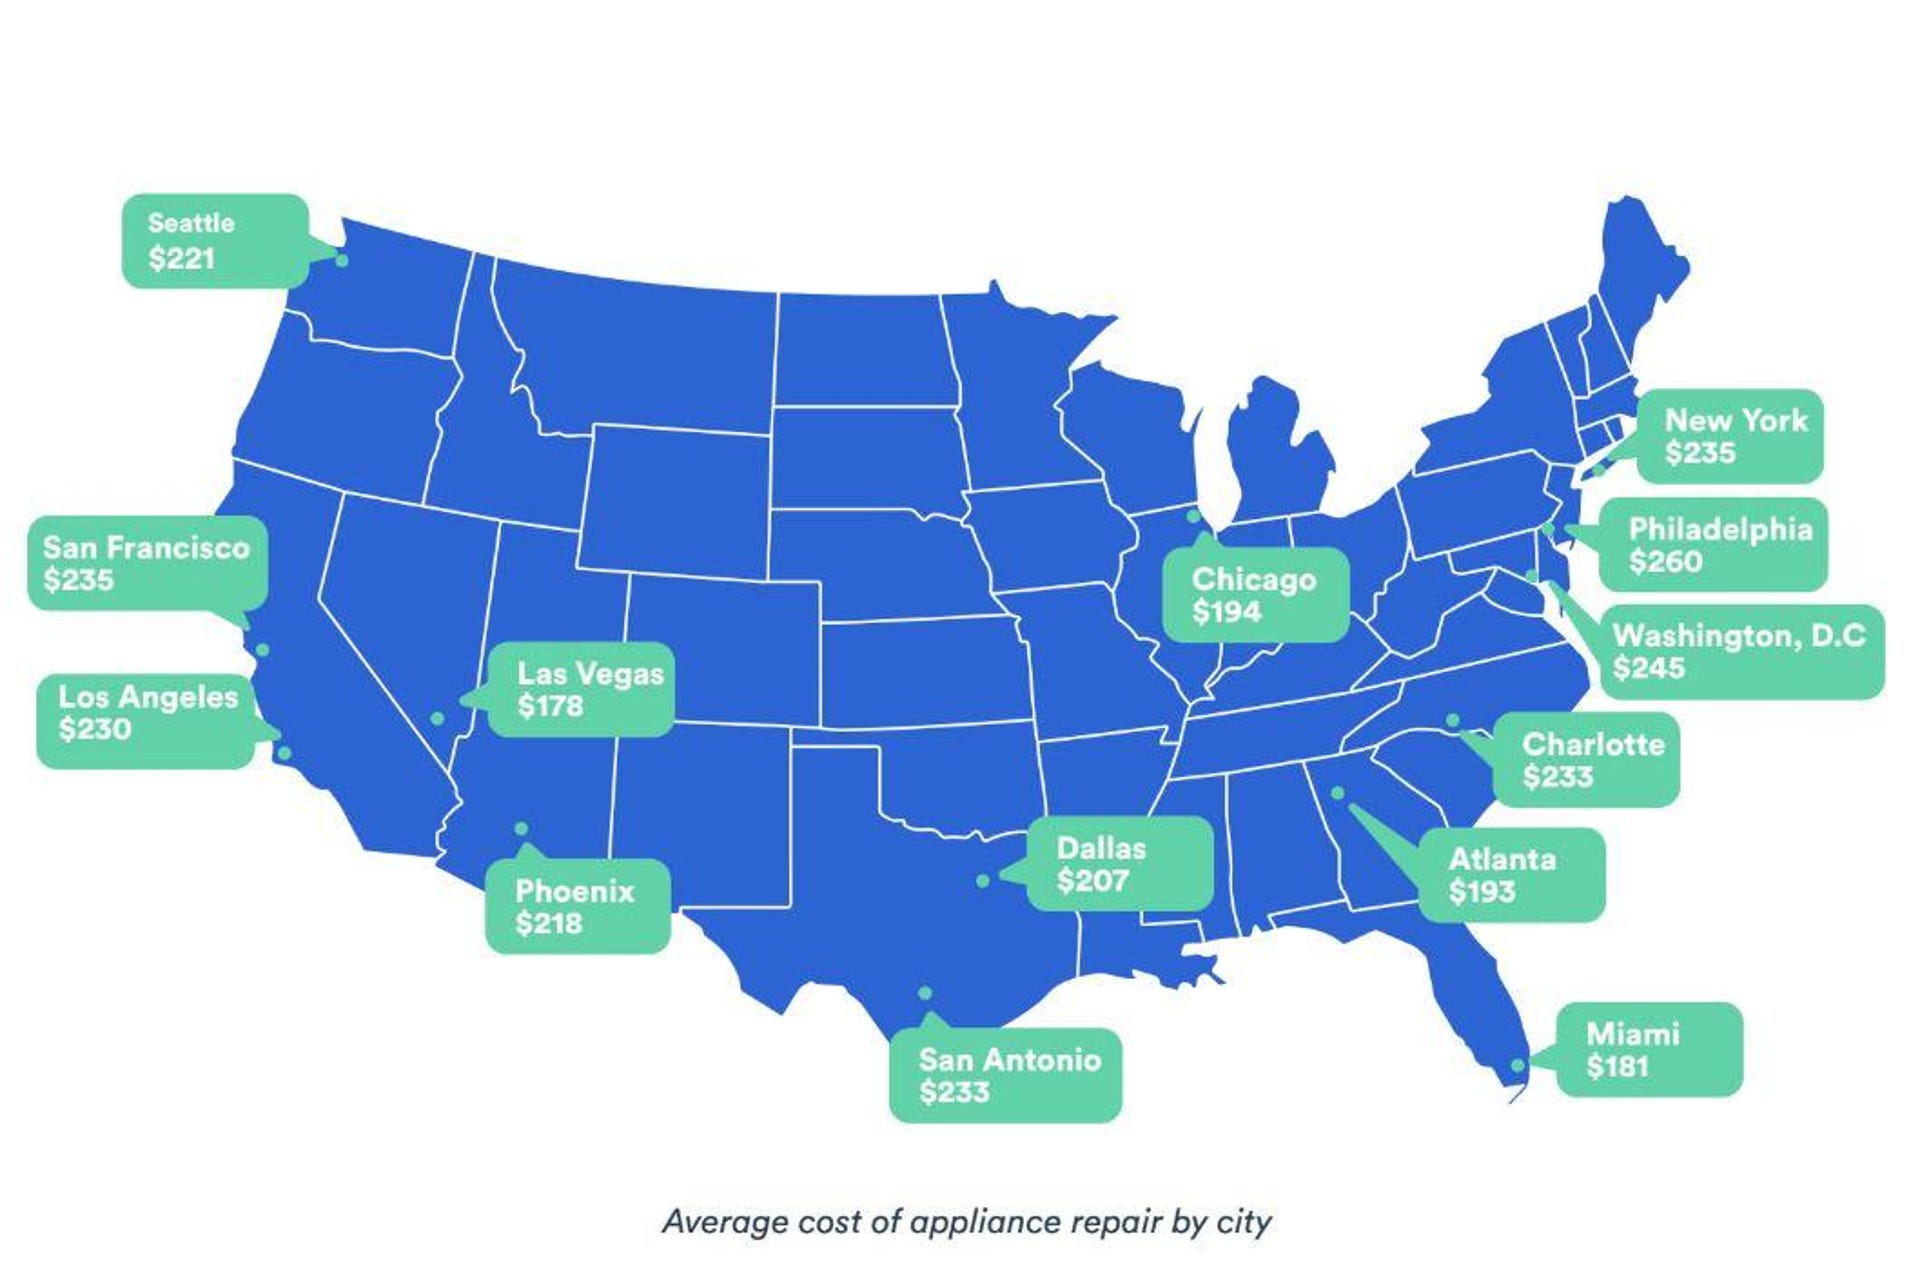 puls-appliance-brand-reliability-survey-2019-average-repair-cost-by-city